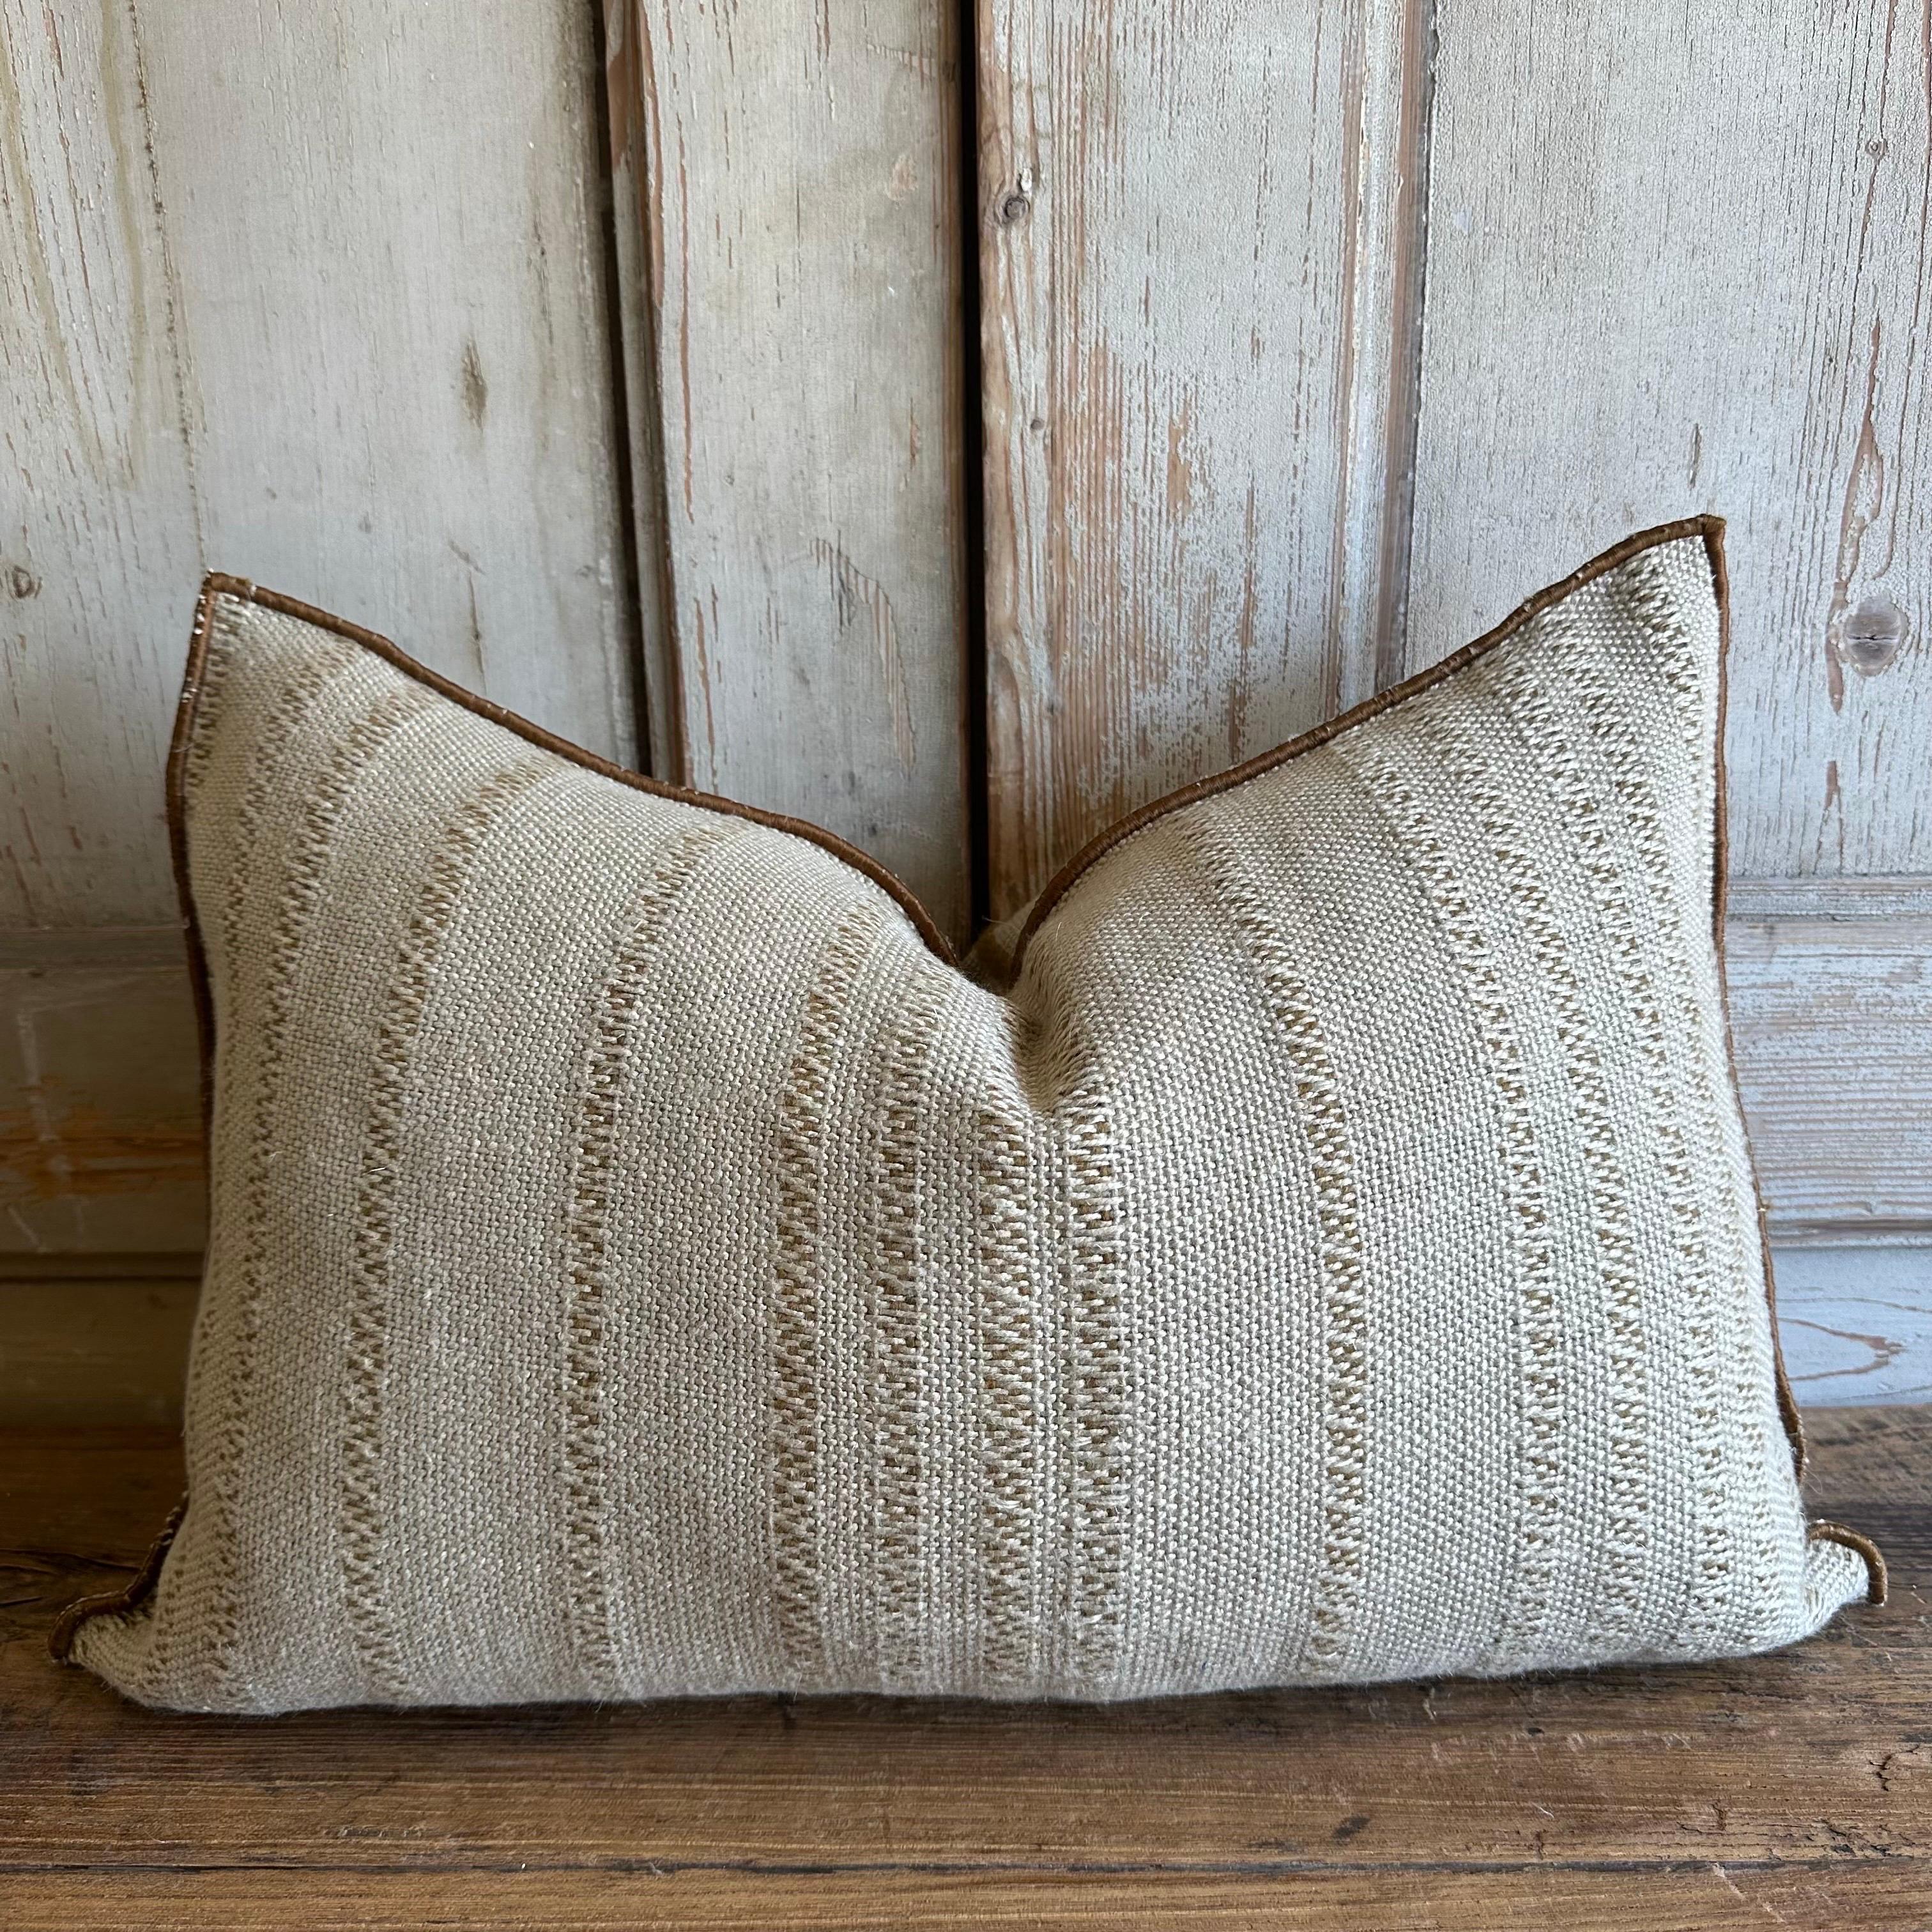 Custom made to order linen pillows from France beautiful natural flax heavy weight linen backing with a deep dark mustard gold embroidered stripe pattern, and custom binded edging. 
Brass zipper closure, overlocked edges. 
Made in France.
Size